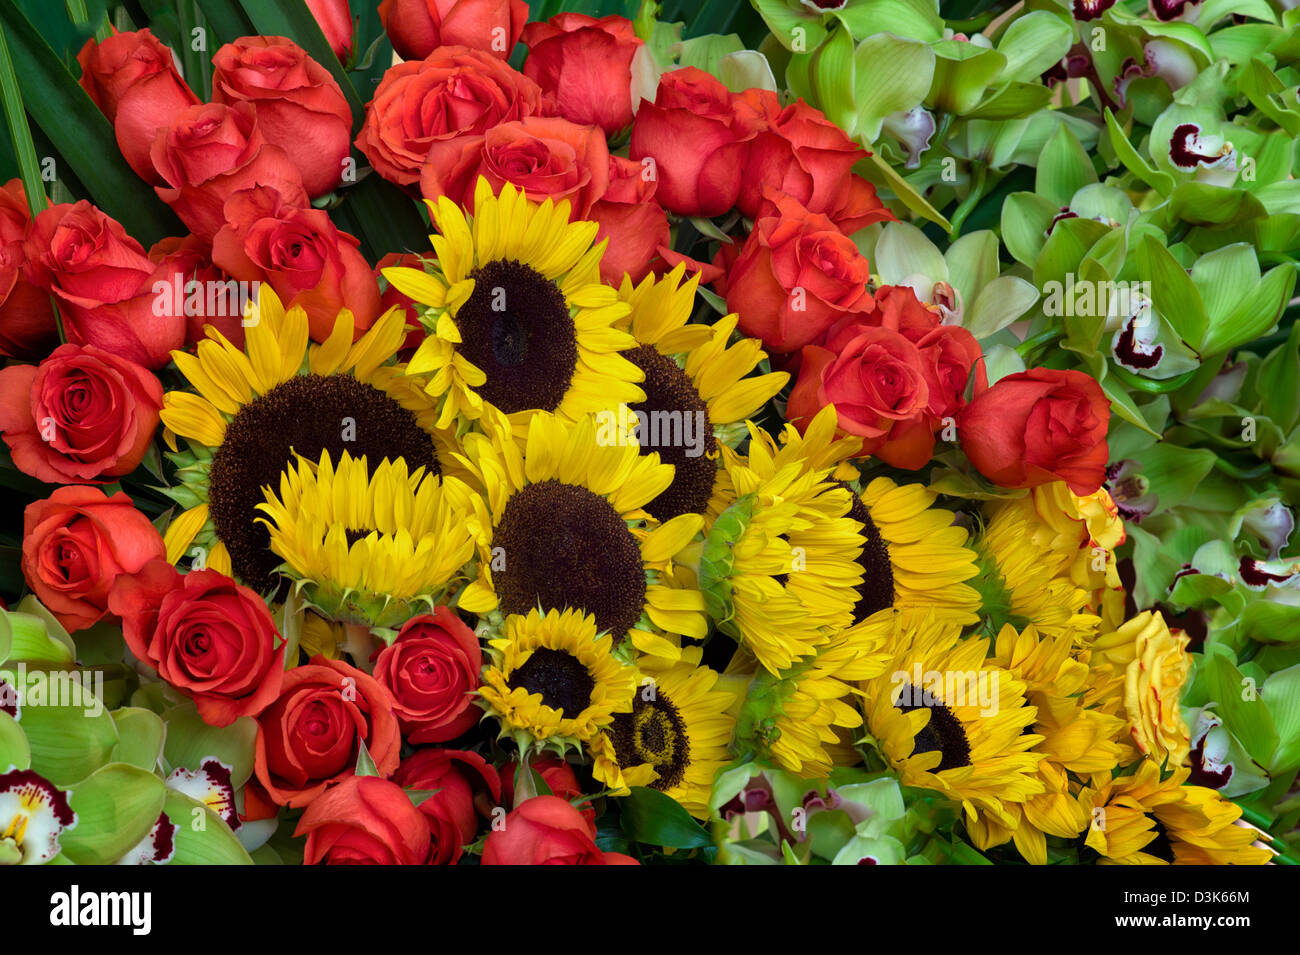 Flower display of sunflowers,roses and orchids. Stock Photo